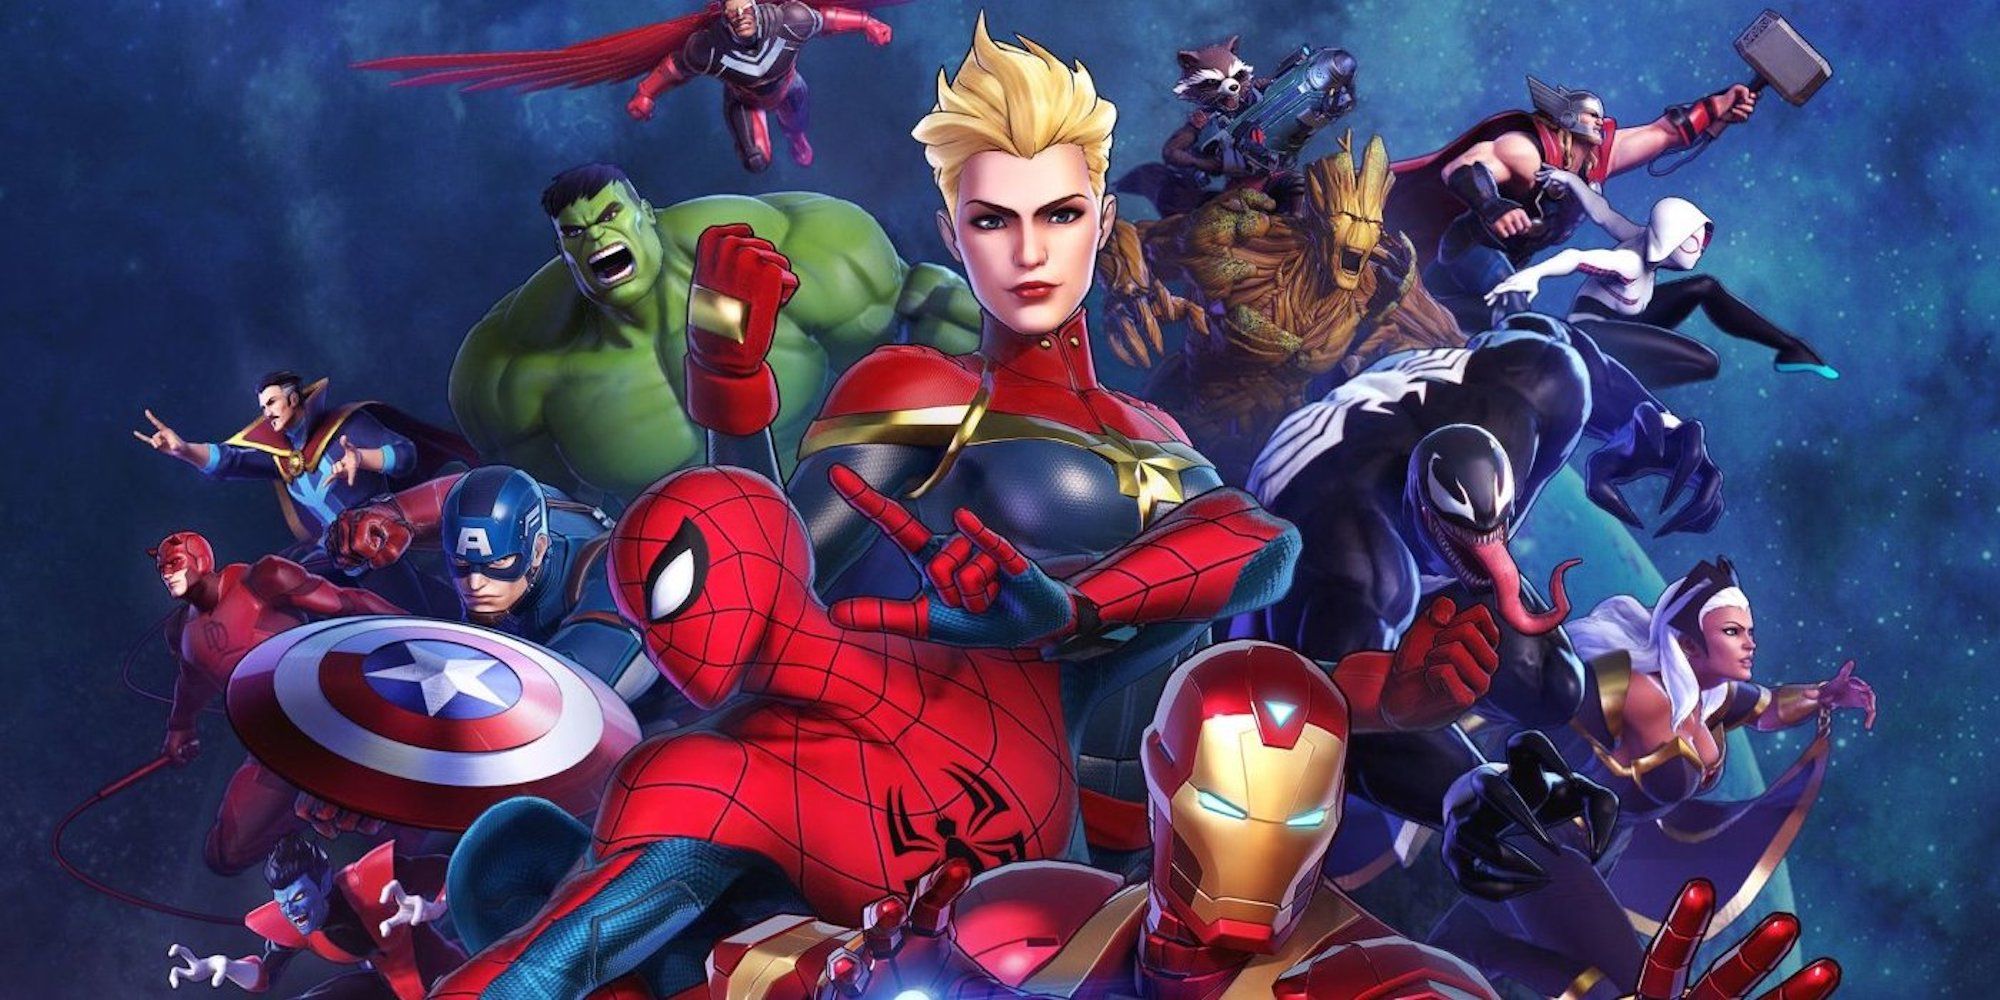 Promotional art featuring characters in Marvel Ultimate Alliance 3